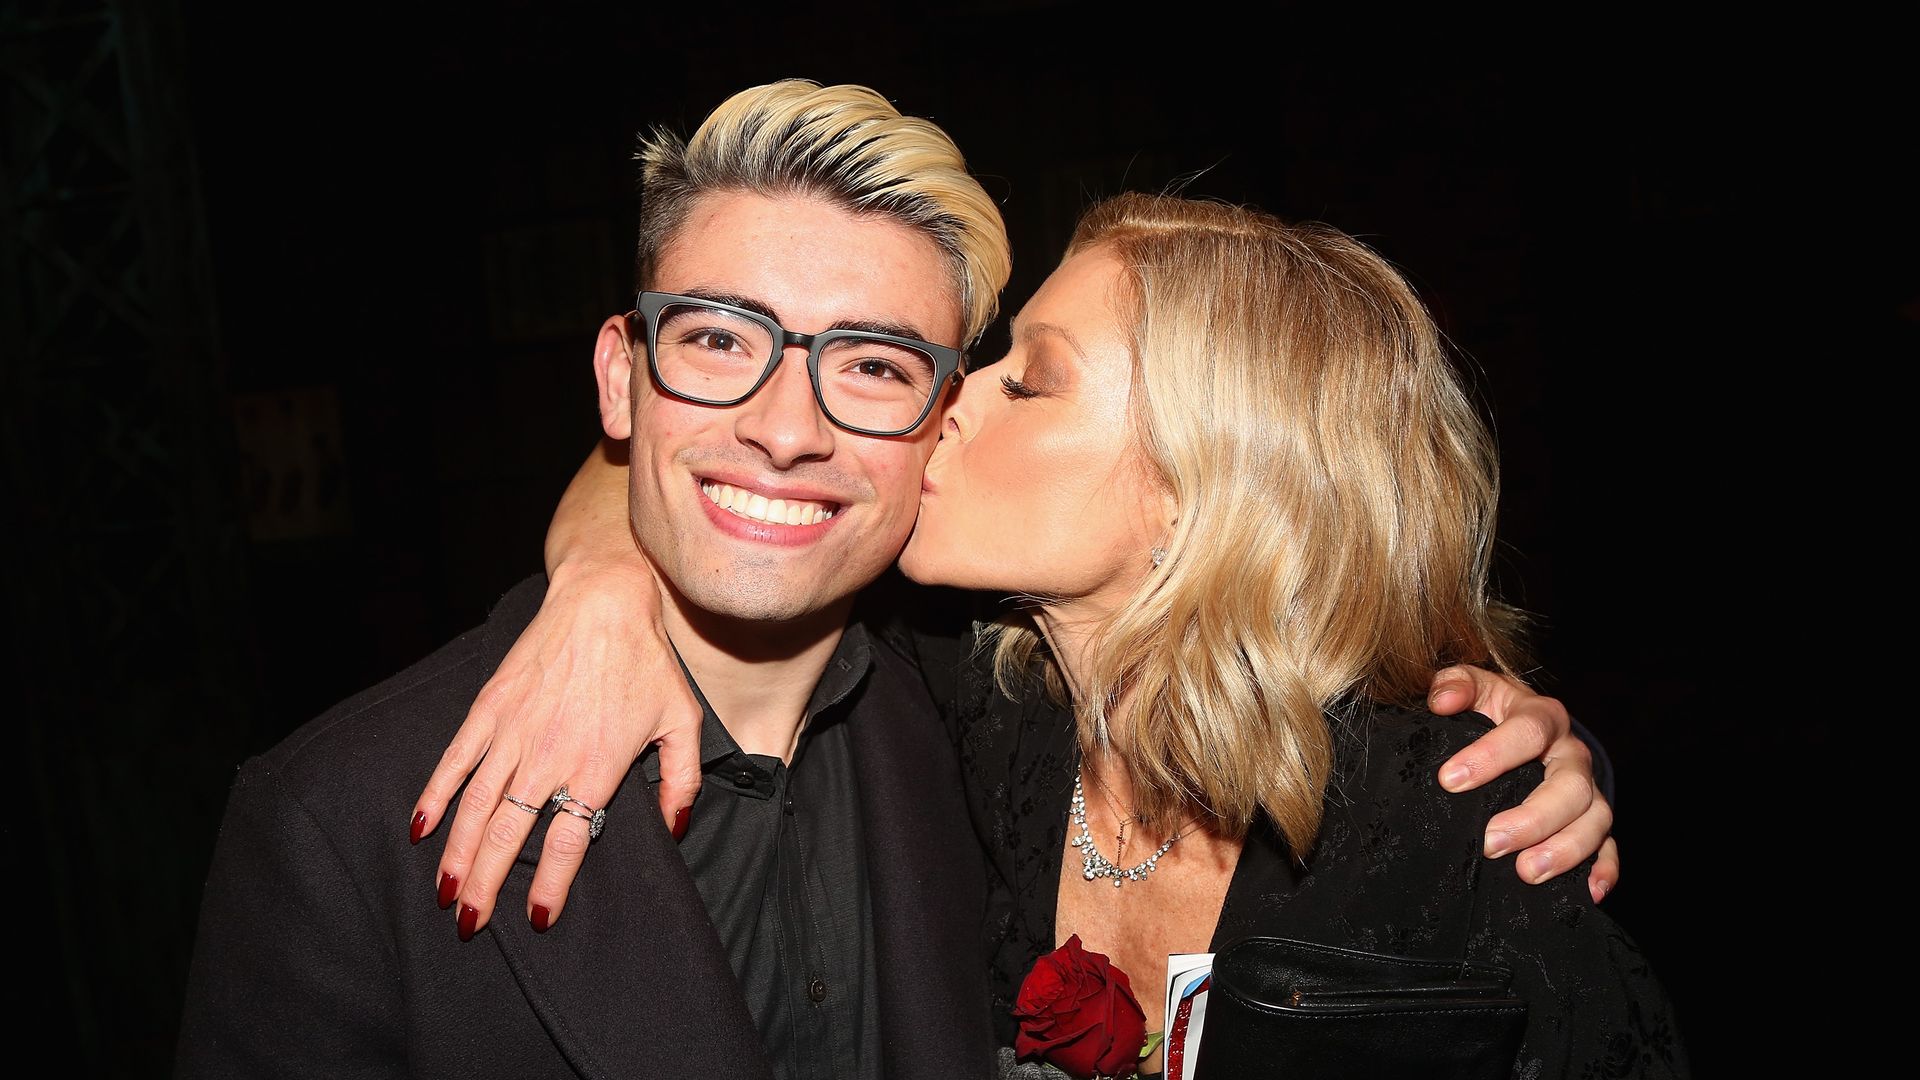 Michael Consuelos and Kelly Ripa pose backstage as Jake Shears of the rock group "The Scissor Sisters" makes his Broadway debut in the hit musical "Kinky Boots" on Broadway at  The Al Hirschfeld Theatre on January 8, 2018 in New York City.